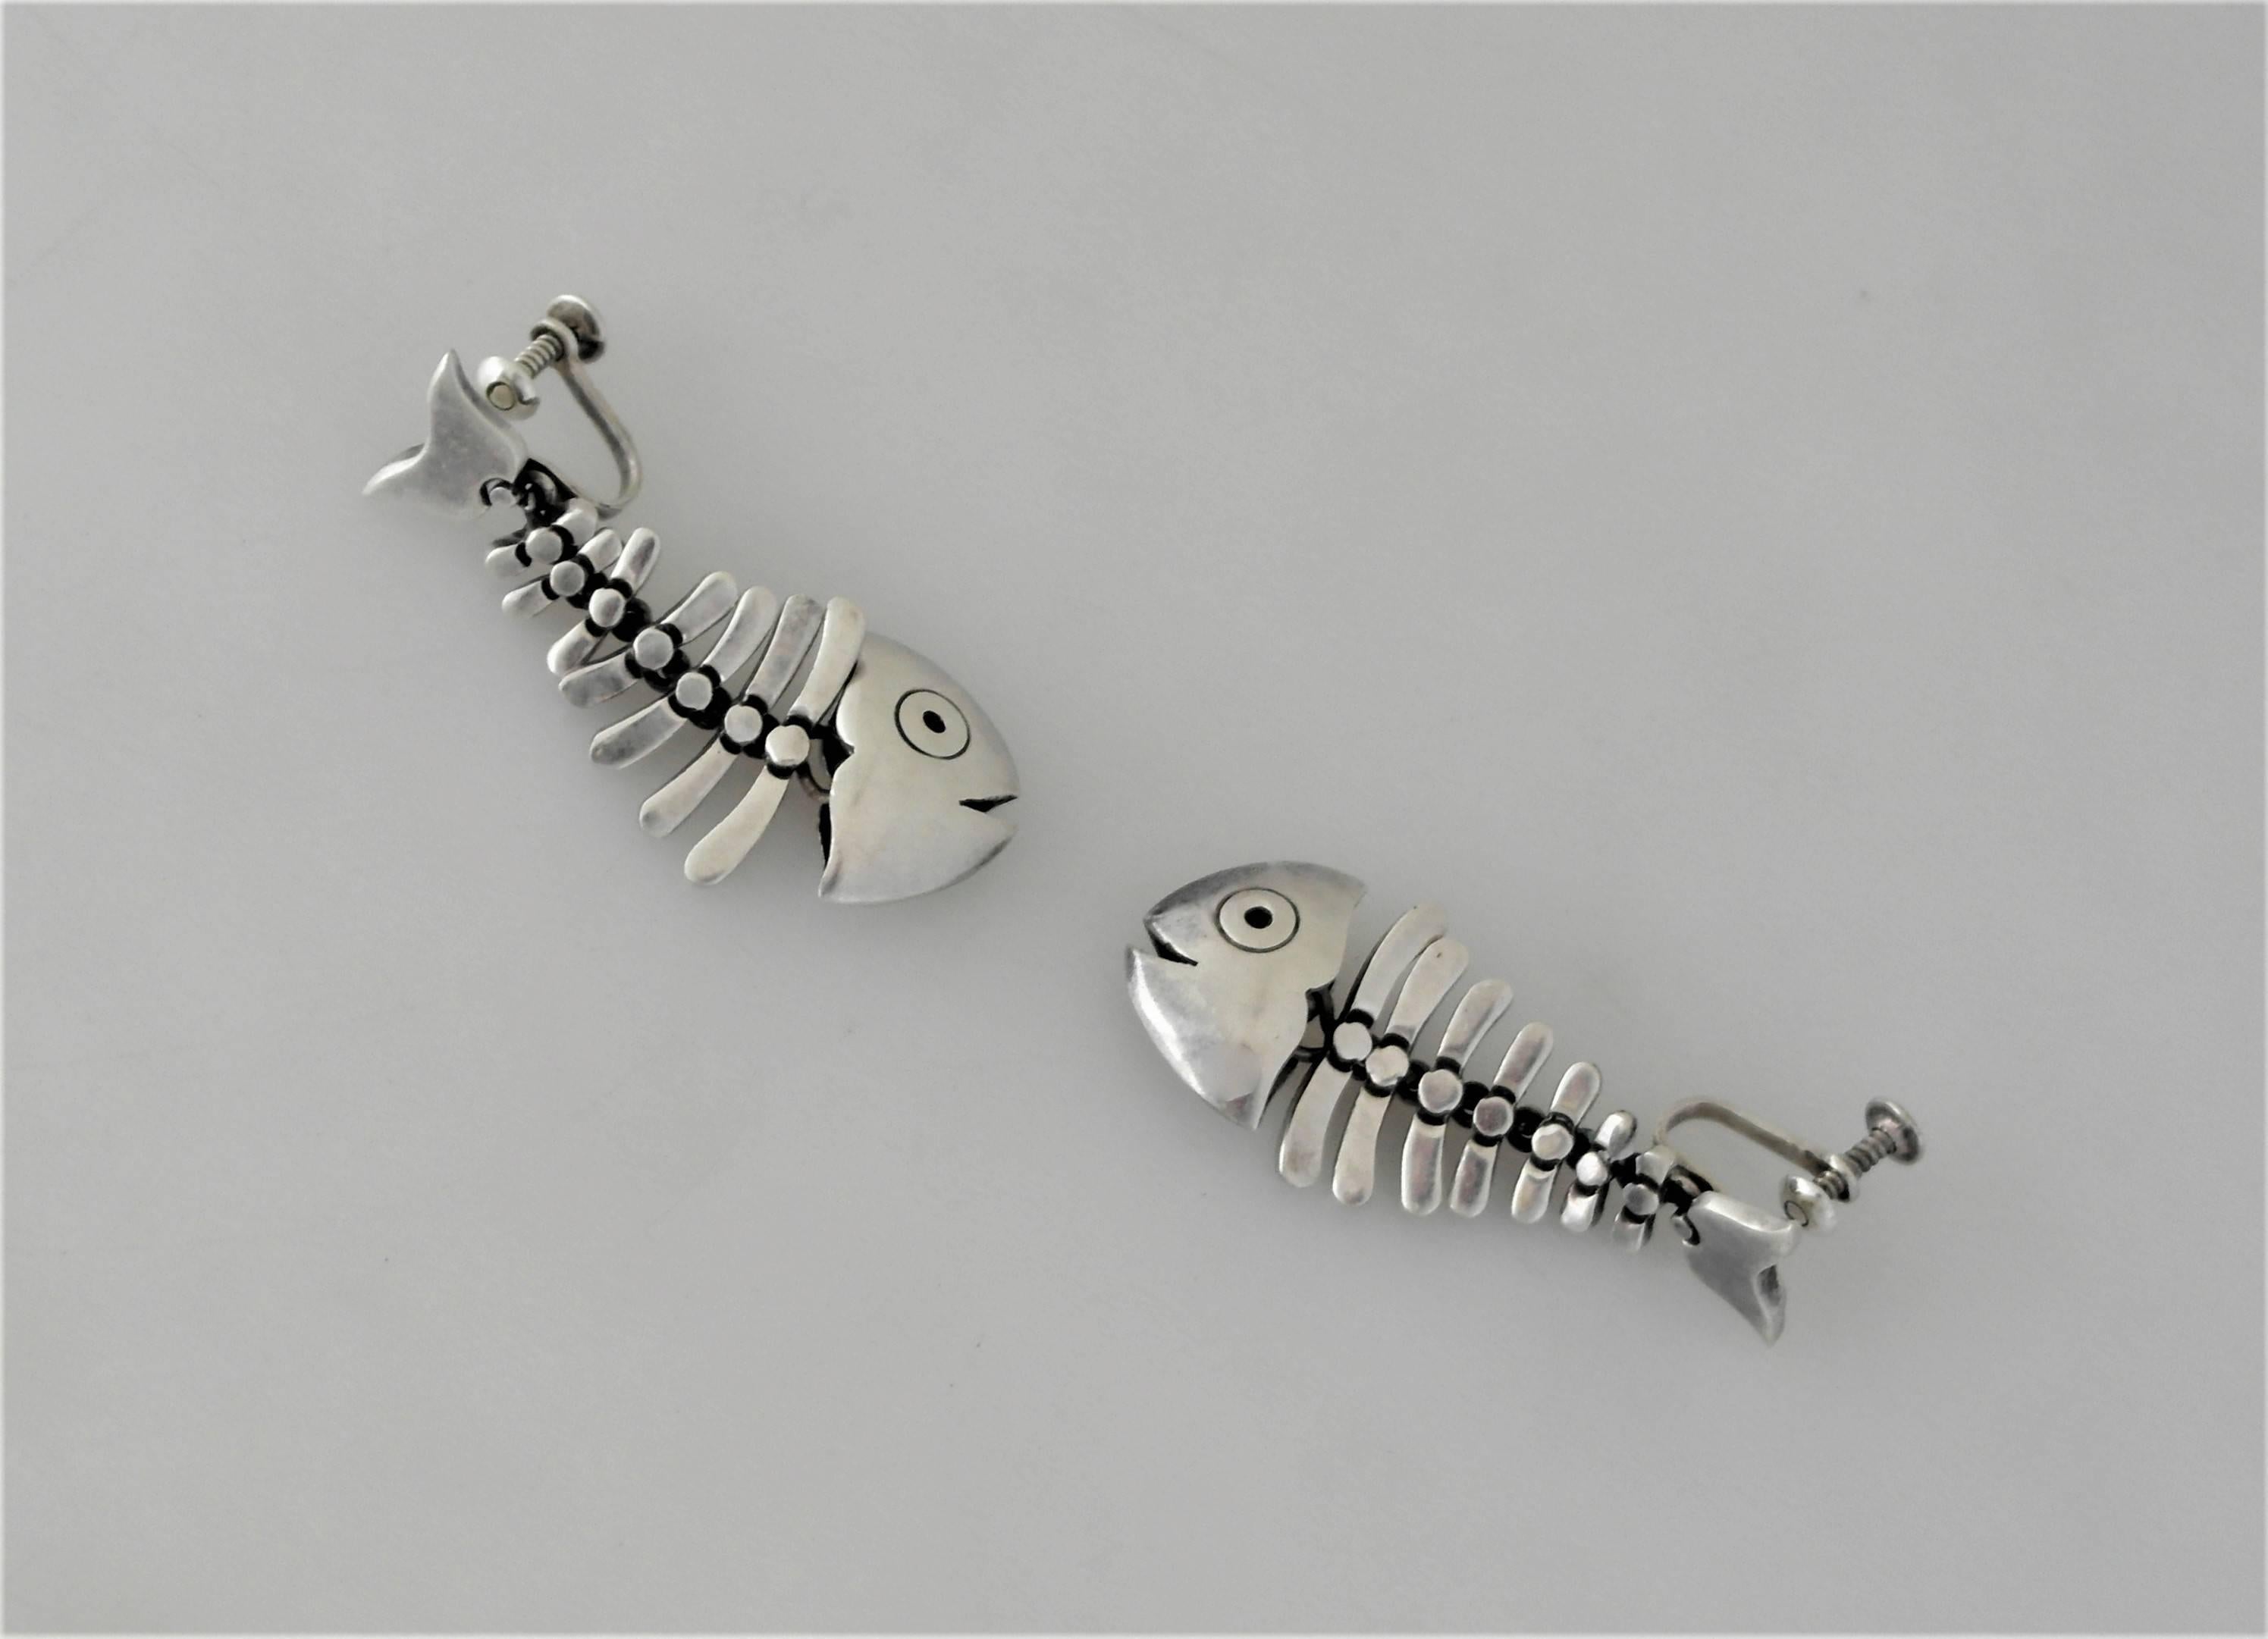 Being offered are a pair of circa 1960 sterling silver earrings made by Antonio Pineda of Taxco, Mexico. Earrings in the form of skeletal fish motifs; eagle 17 and Pineda crown mark behind the lever-back. Dimensions 1 3/4 inches long by 3/4 inches